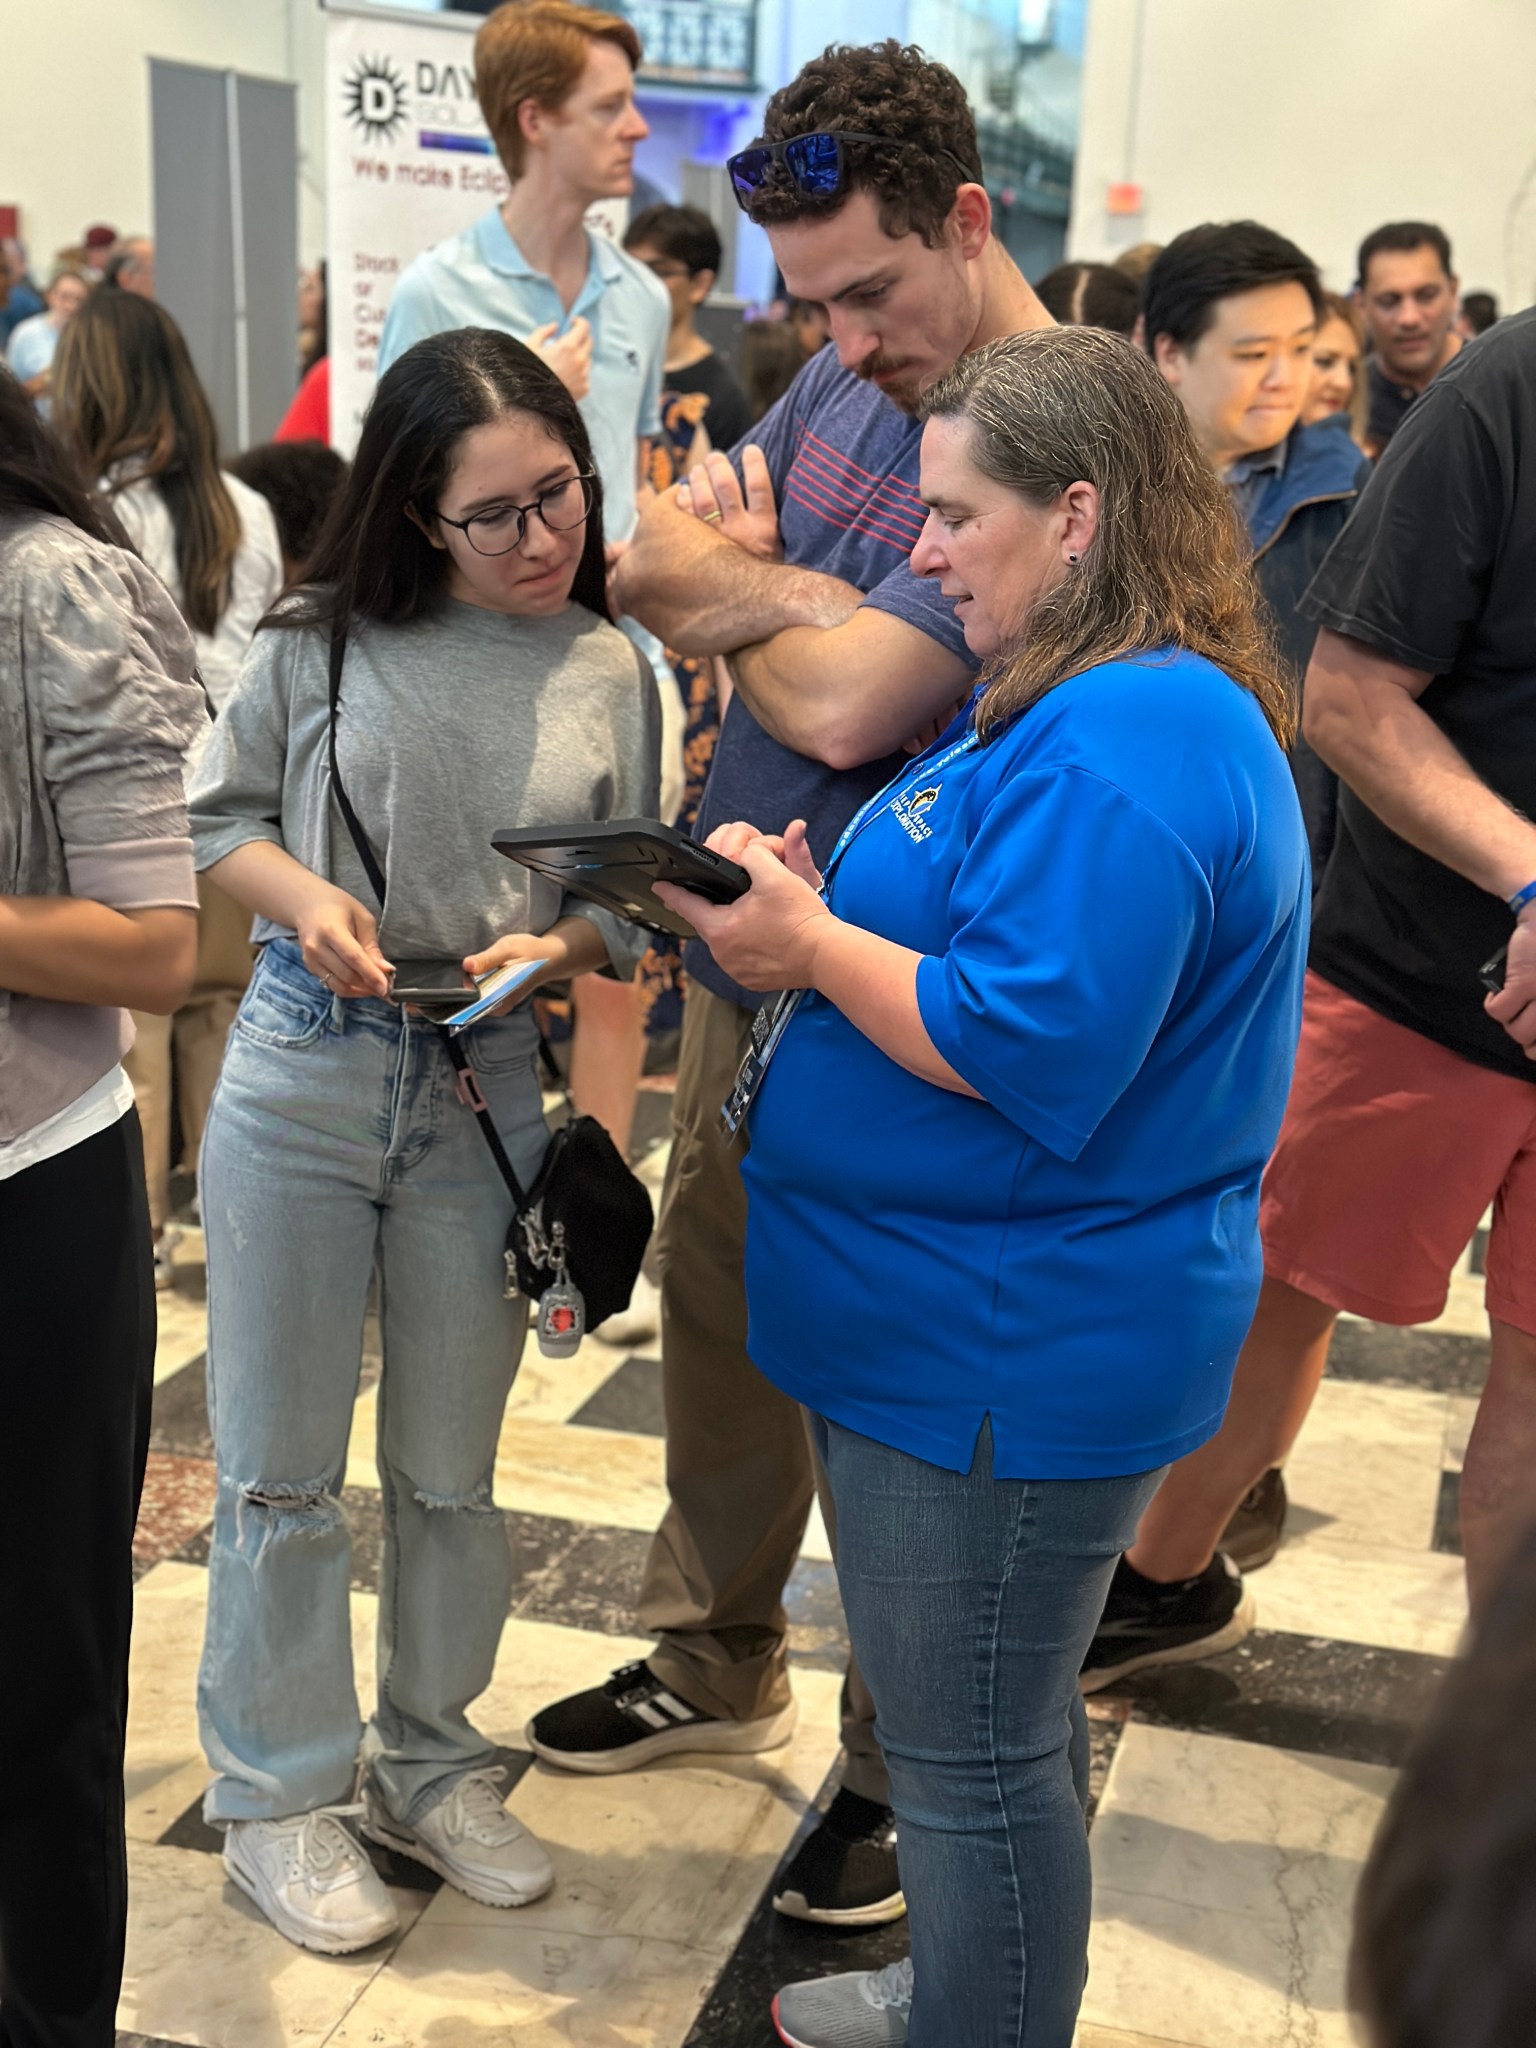 Lynn Bassford, a woman with wavy gray-brown hair, holds a tablet and speaks with members of the public at an event. She wears a bright blue shirt and jeans, and speaks to people in casual clothes who look intently at the tablet.